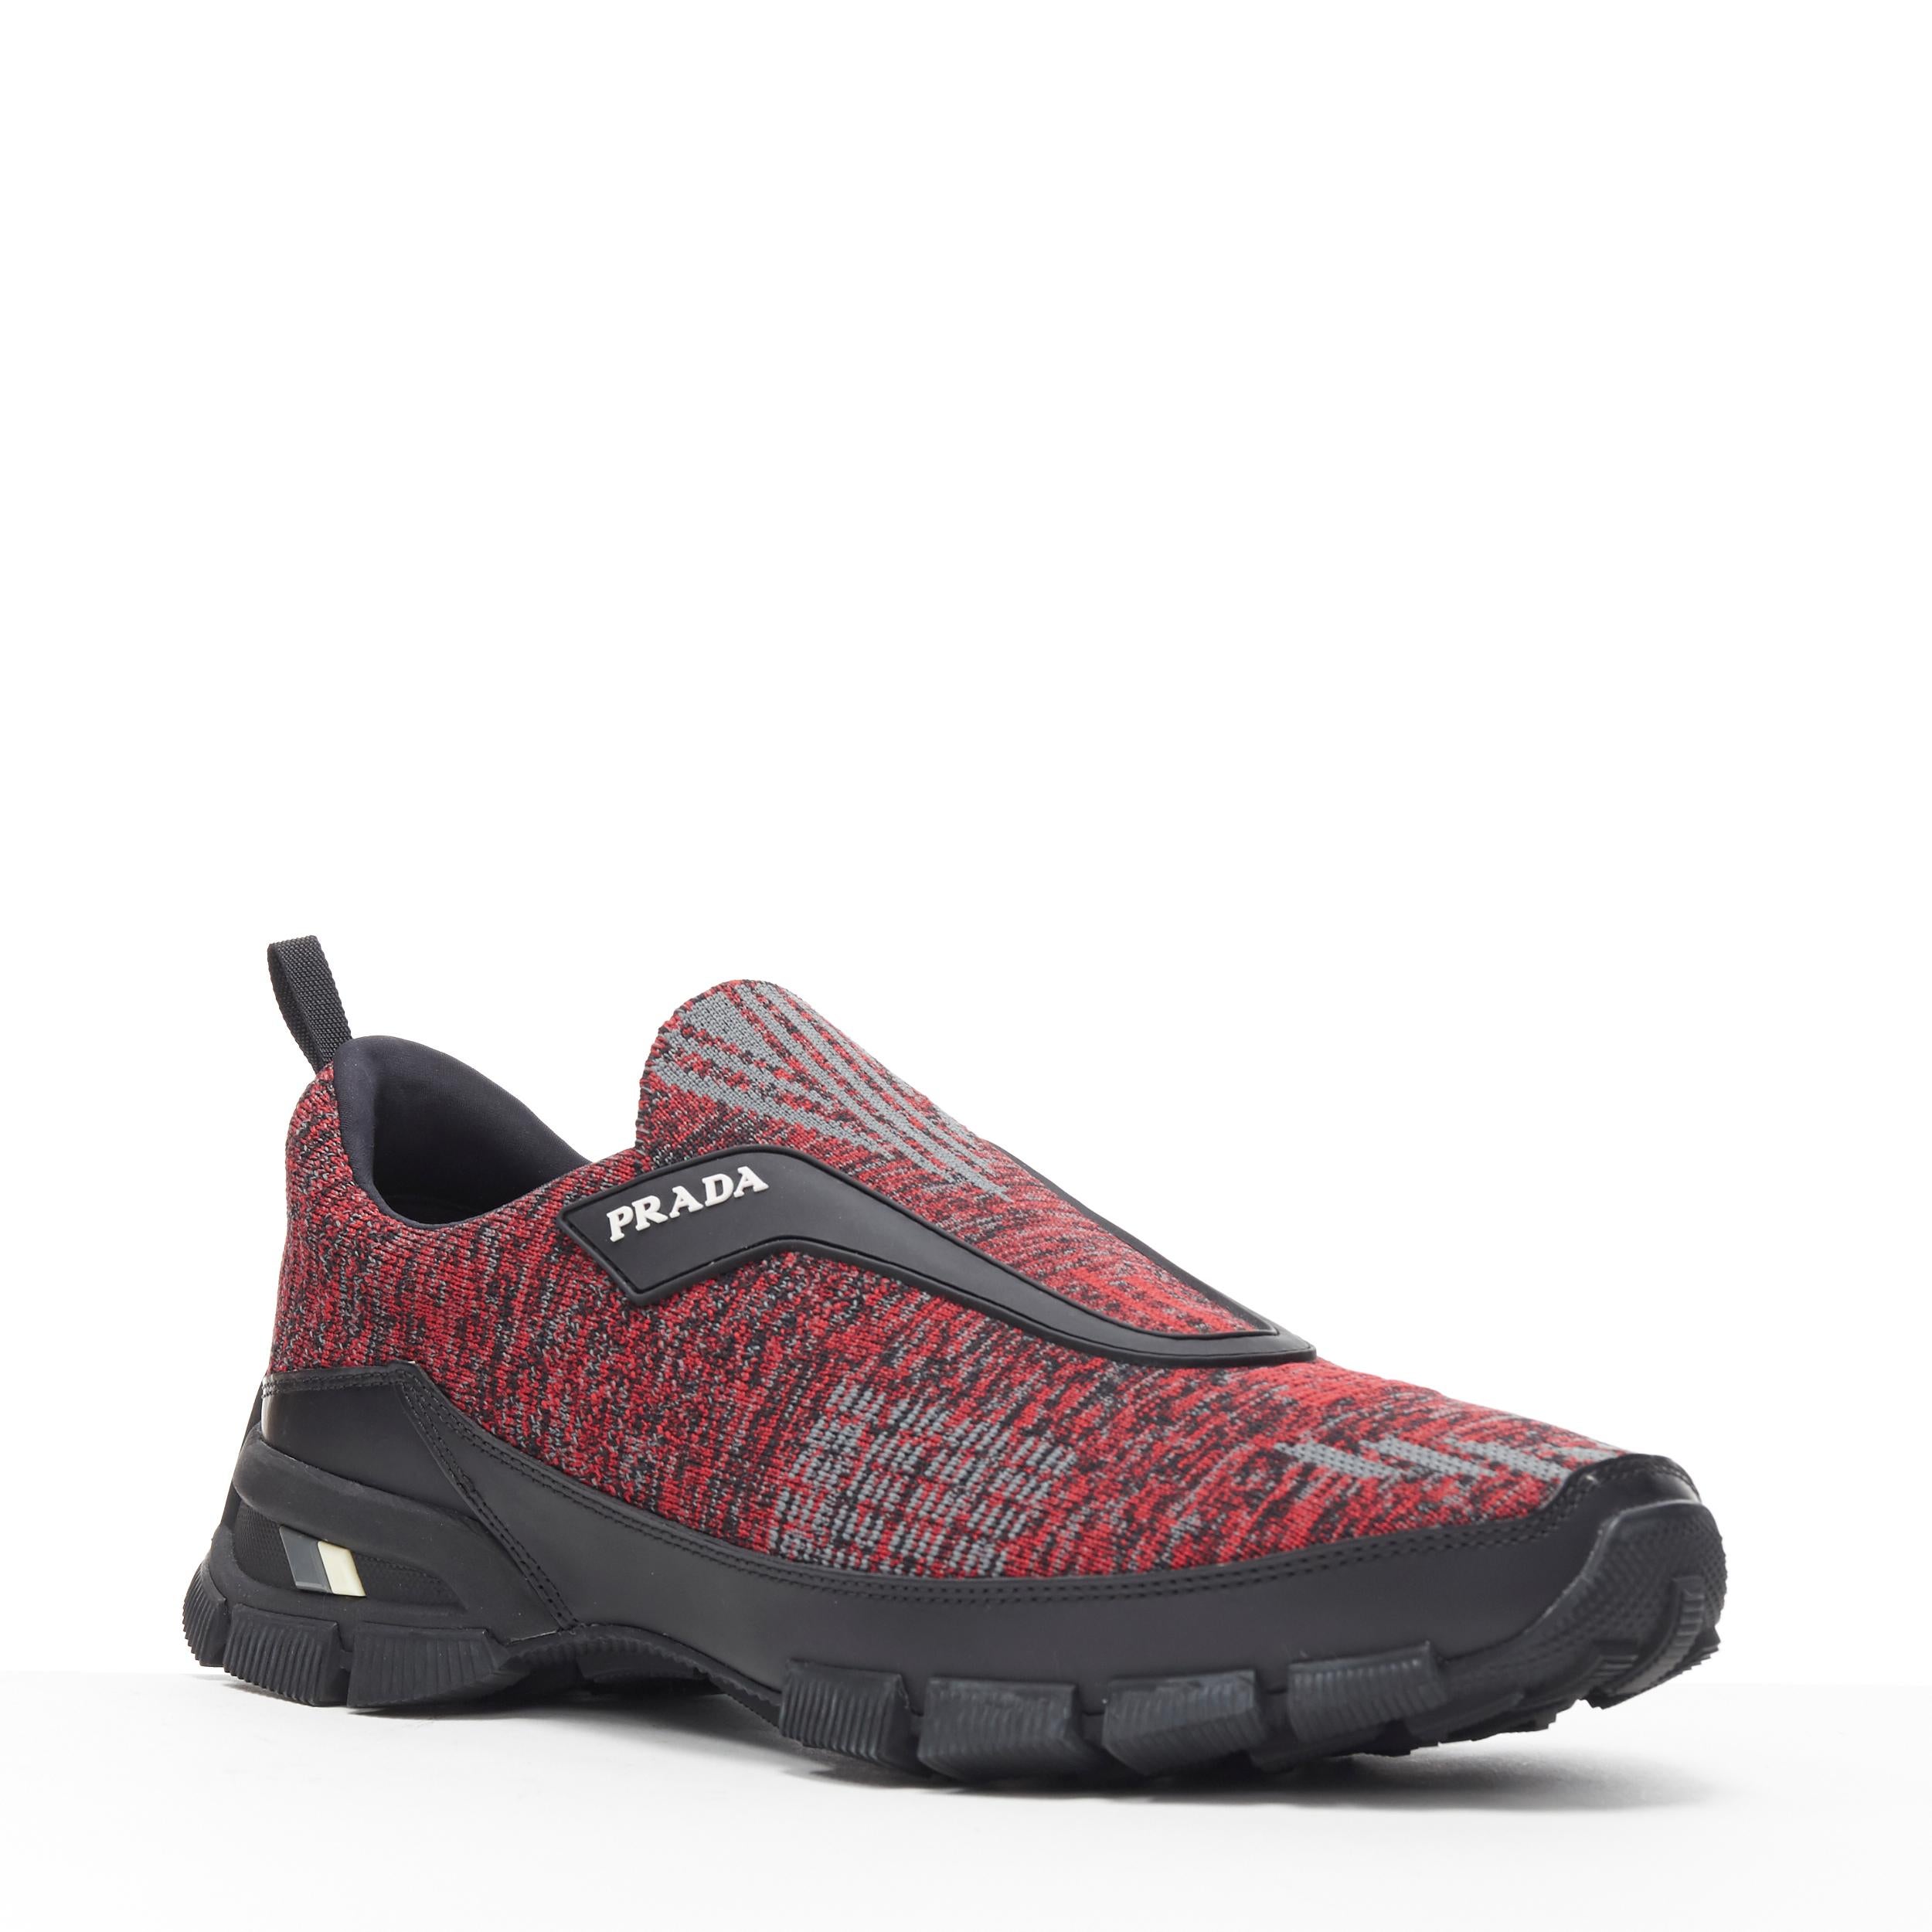 new PRADA Crossection Knit Low red black sock low runner sneakers UK7 EU40
Brand: Prada
Designer: Miuccia Prada
Model Name / Style: Crossection Knit
Material: Fabric, rubber
Color: Red, black
Pattern: Solid
Closure: Pull on
Extra Detail: Red grey